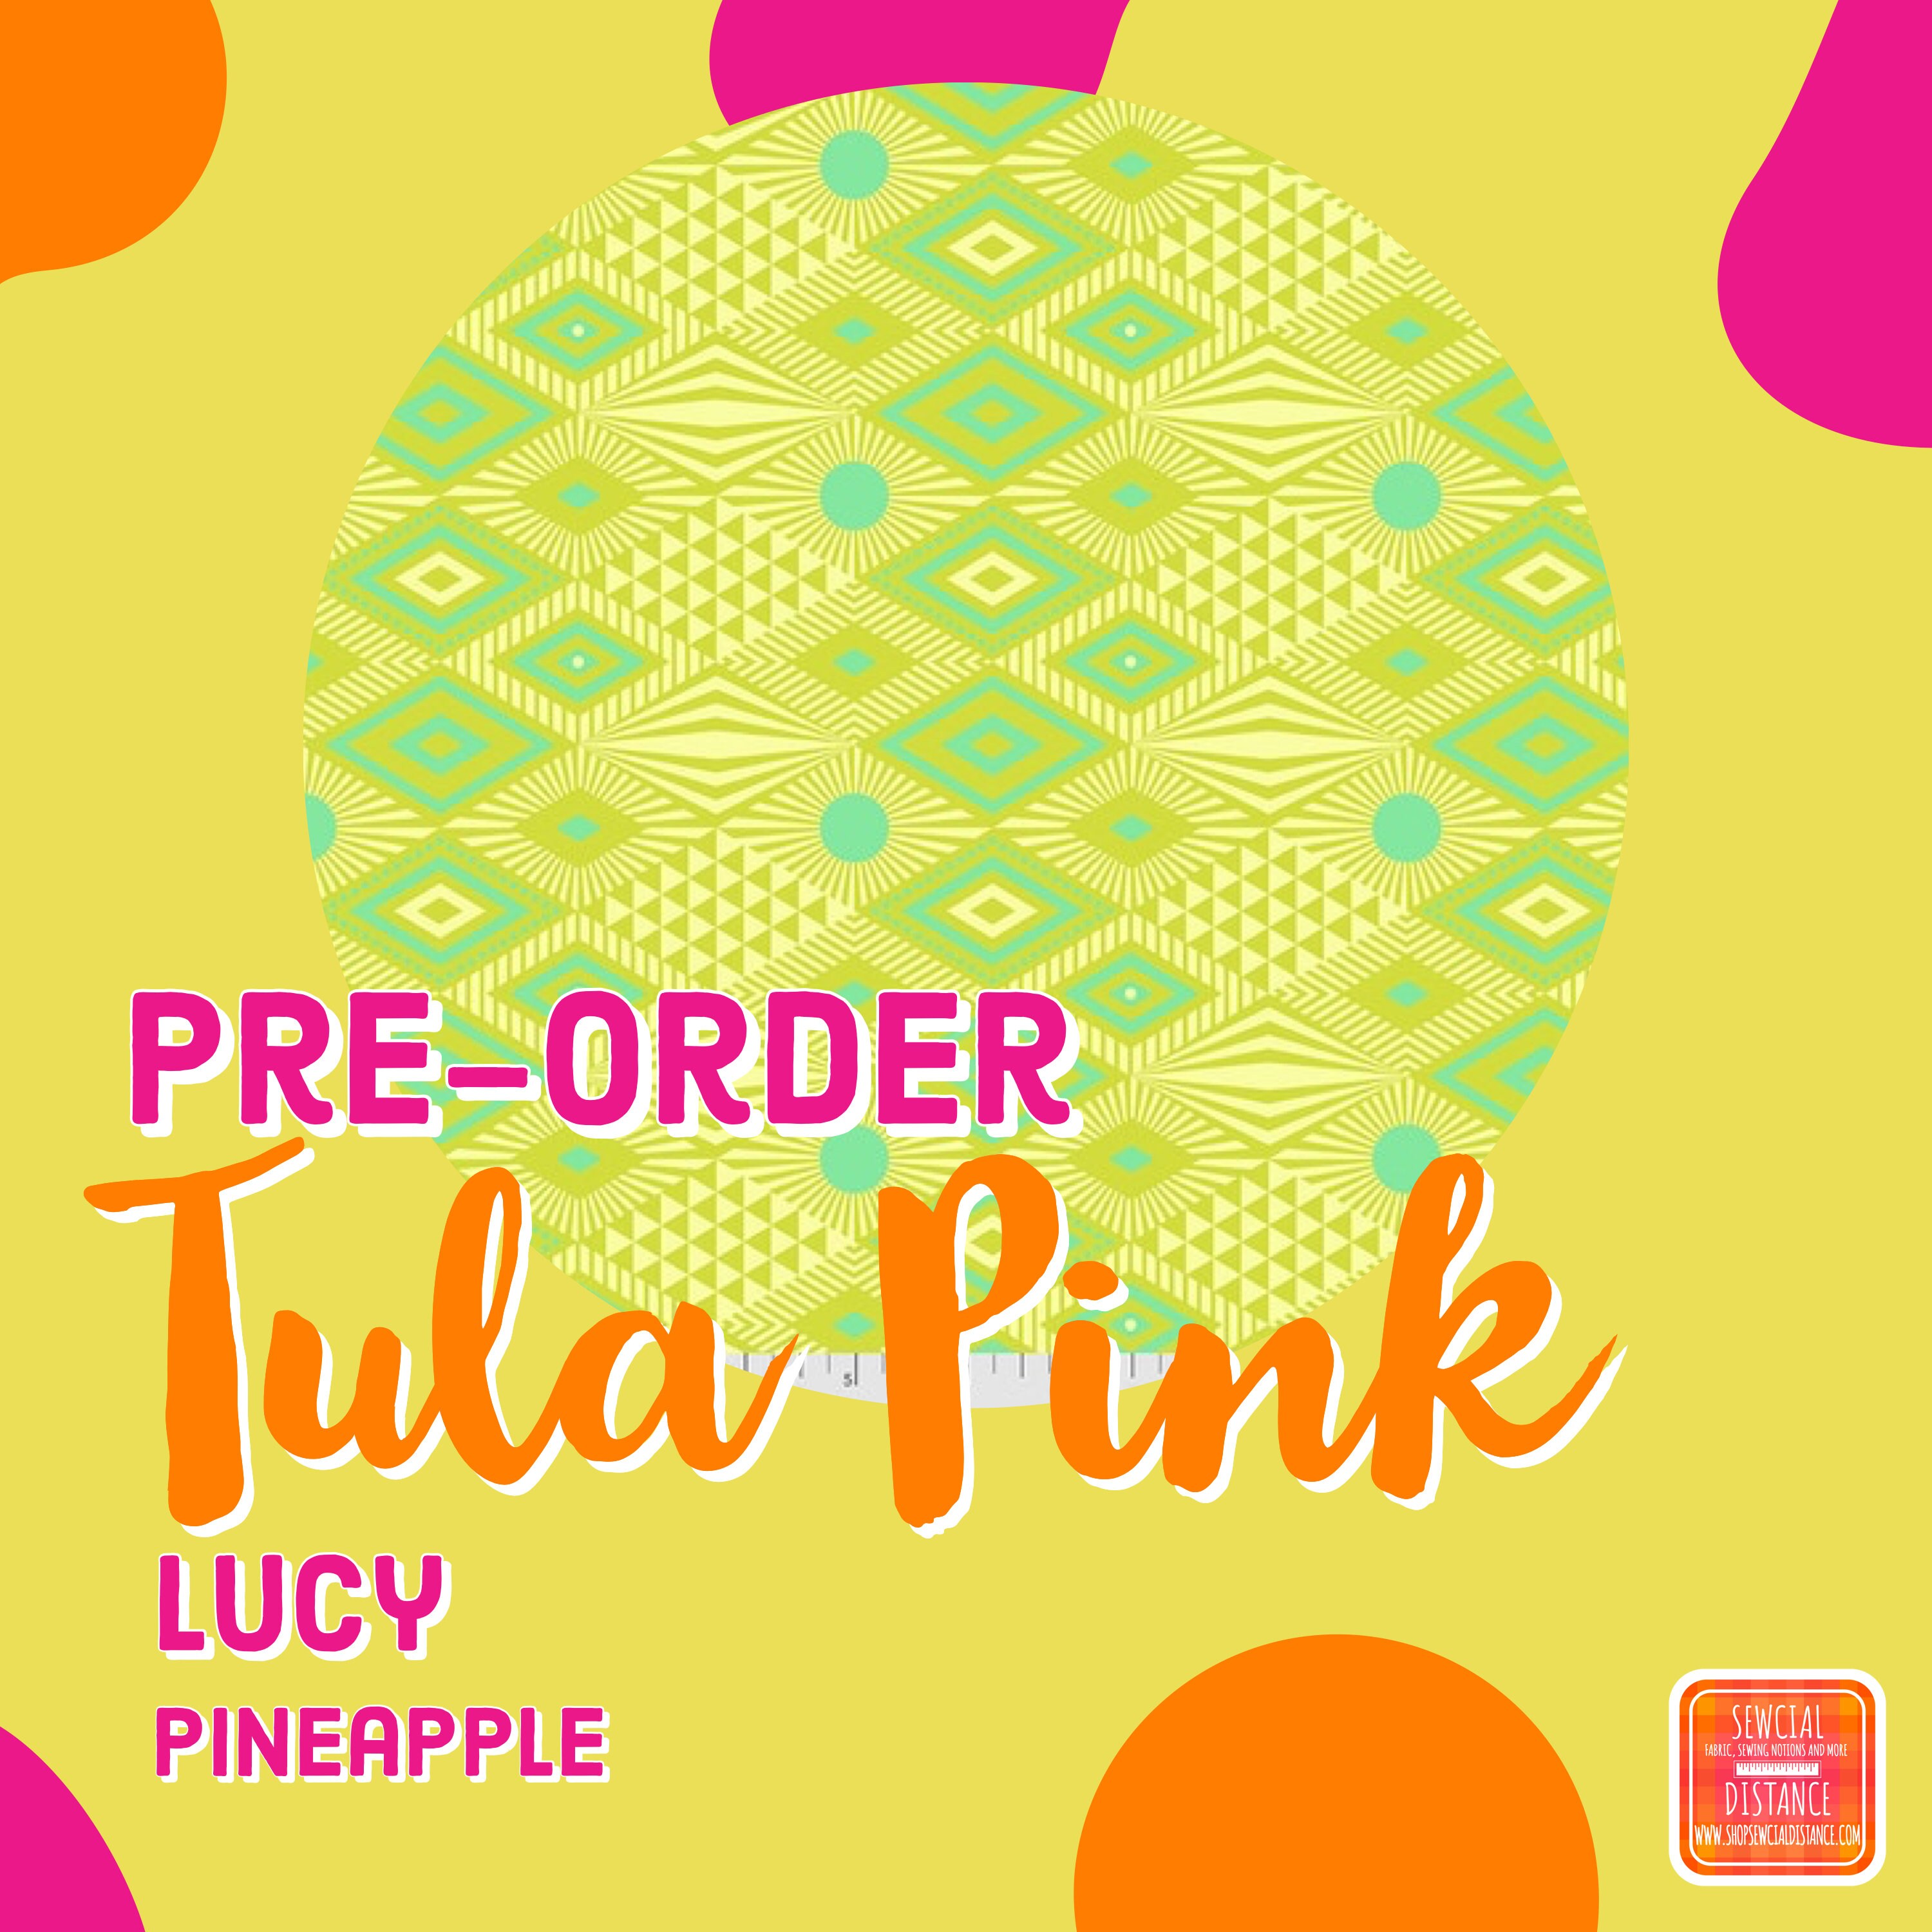 Pre-Order-Tula Pink-Daydreamer-By the 12 Yard-Lucy-Dragonfruit